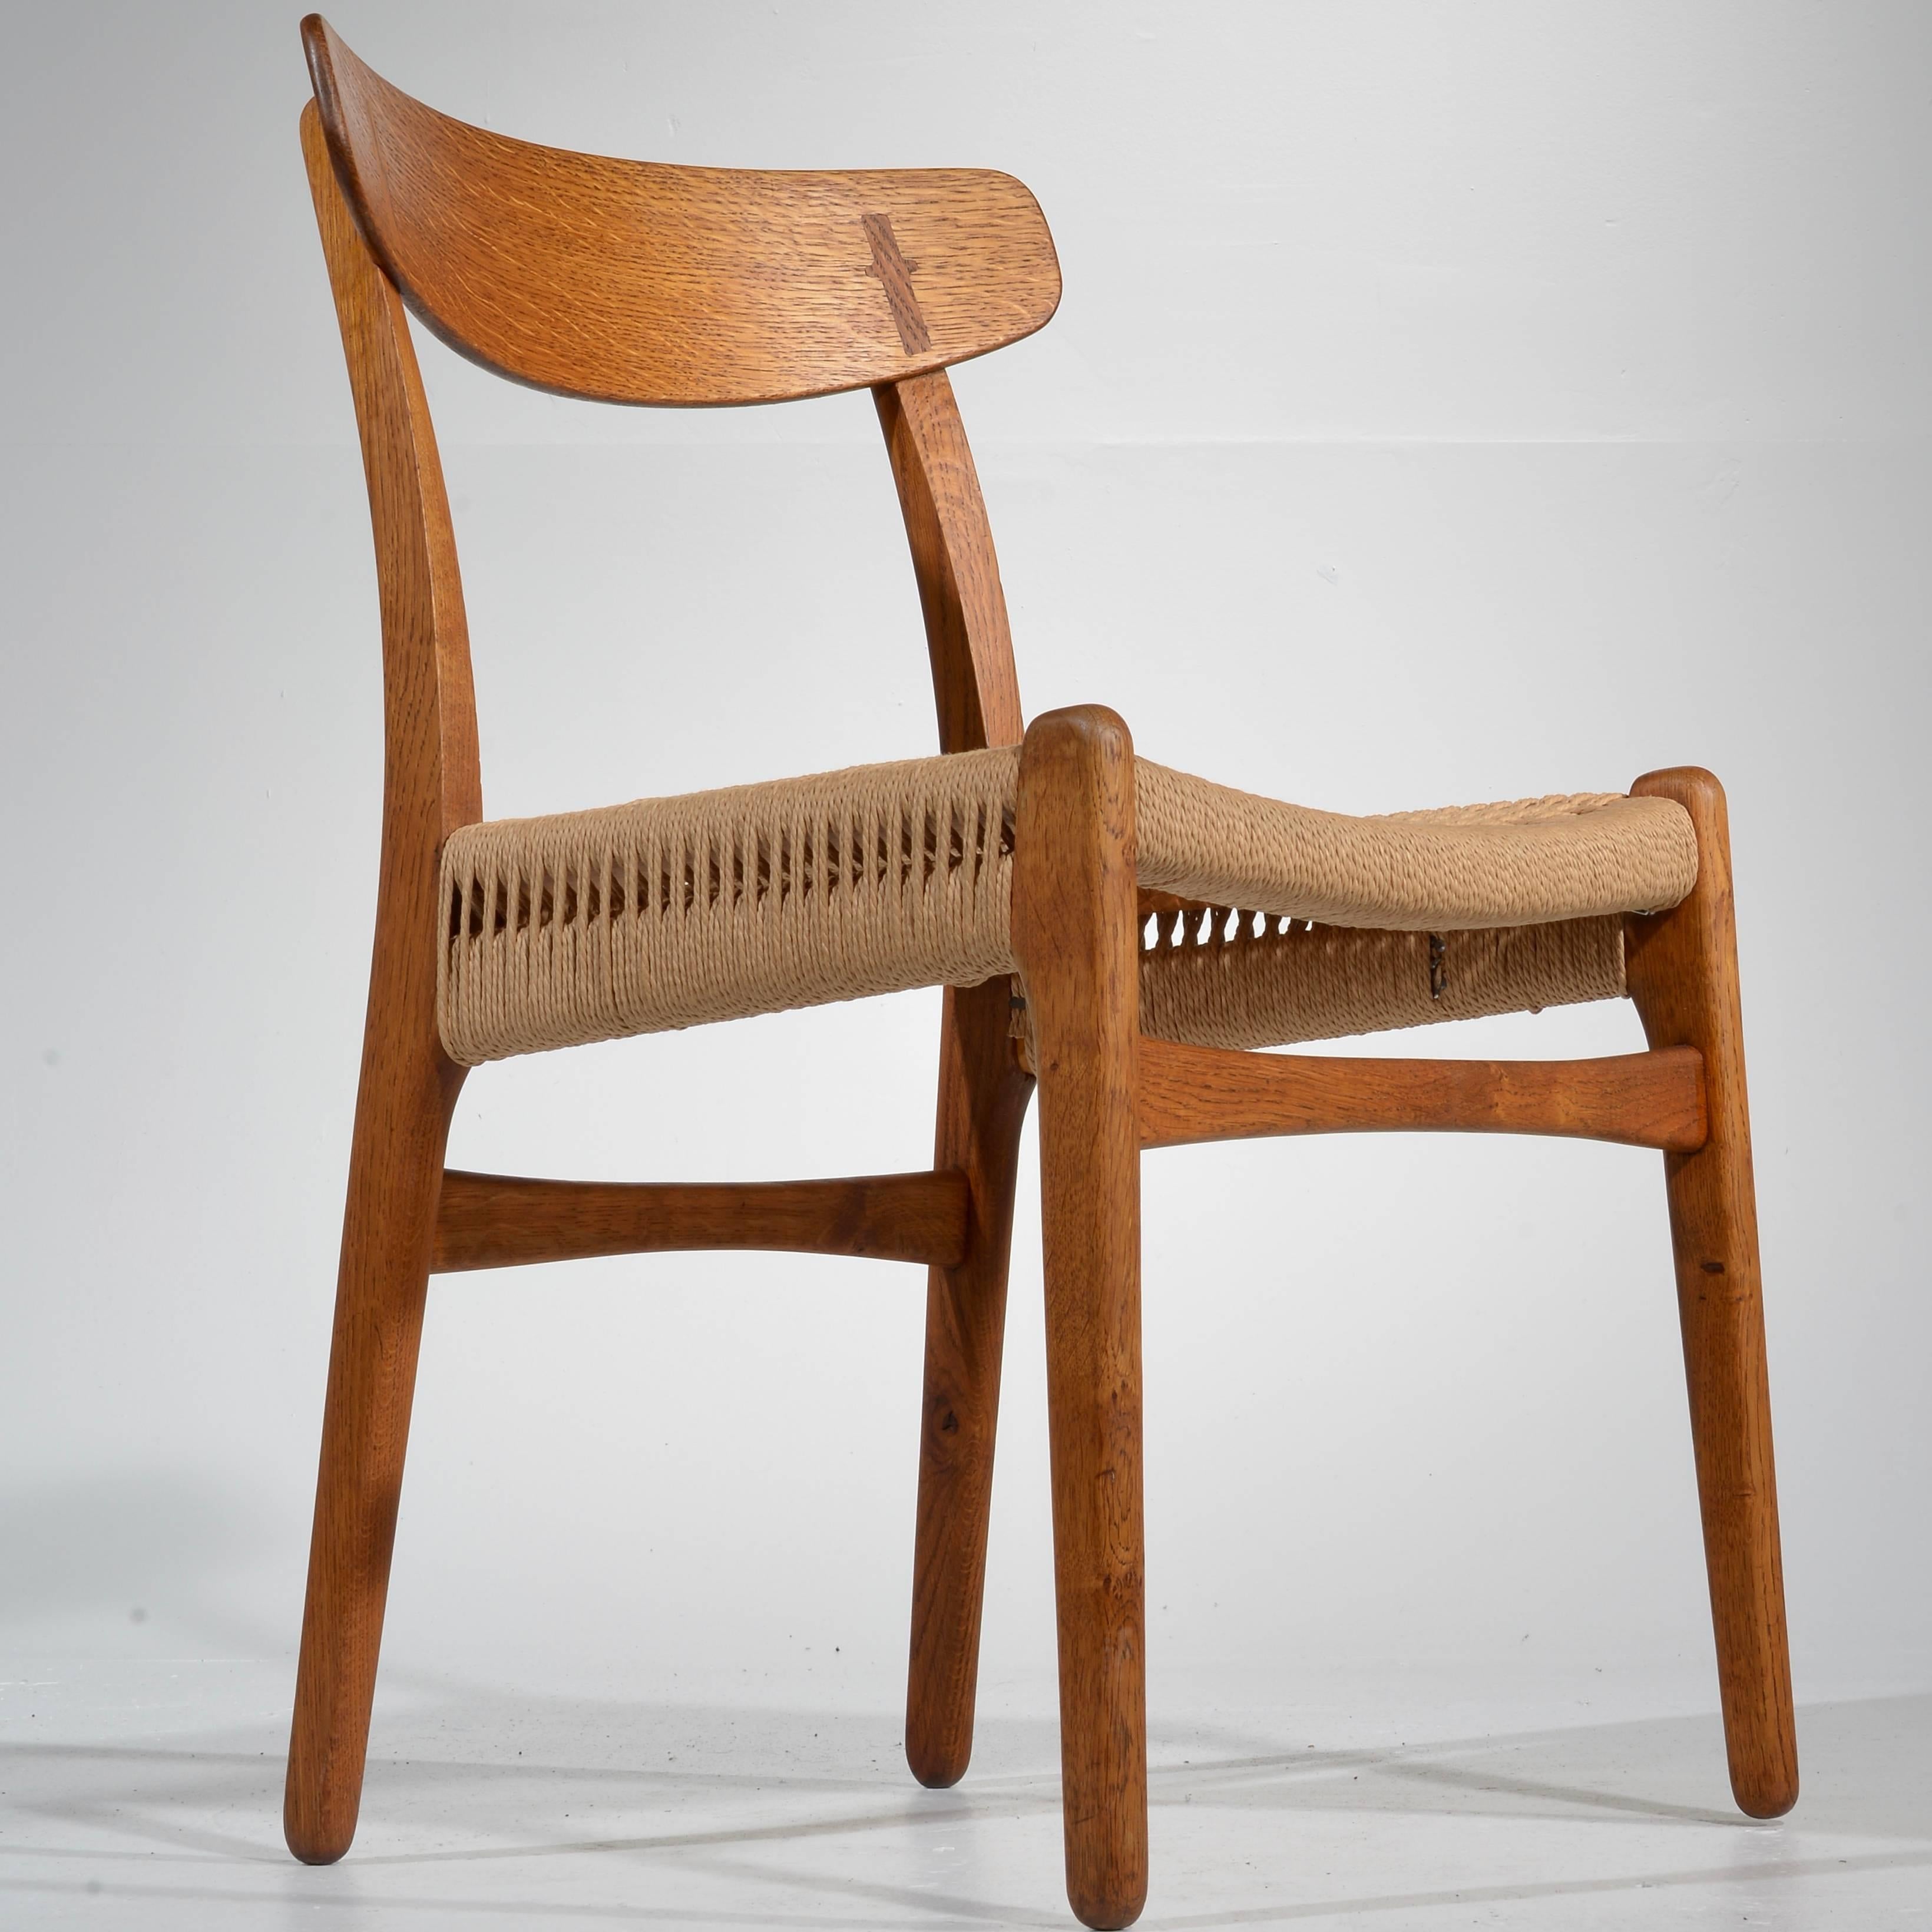 This is a beautiful and rare set of four Hans Wegner model CH-23 oak dining chairs produced by Carl Hansen & Son in Denmark. This set has been fully restored including new rope seats, re-glued joinery, and professional re-finishing.